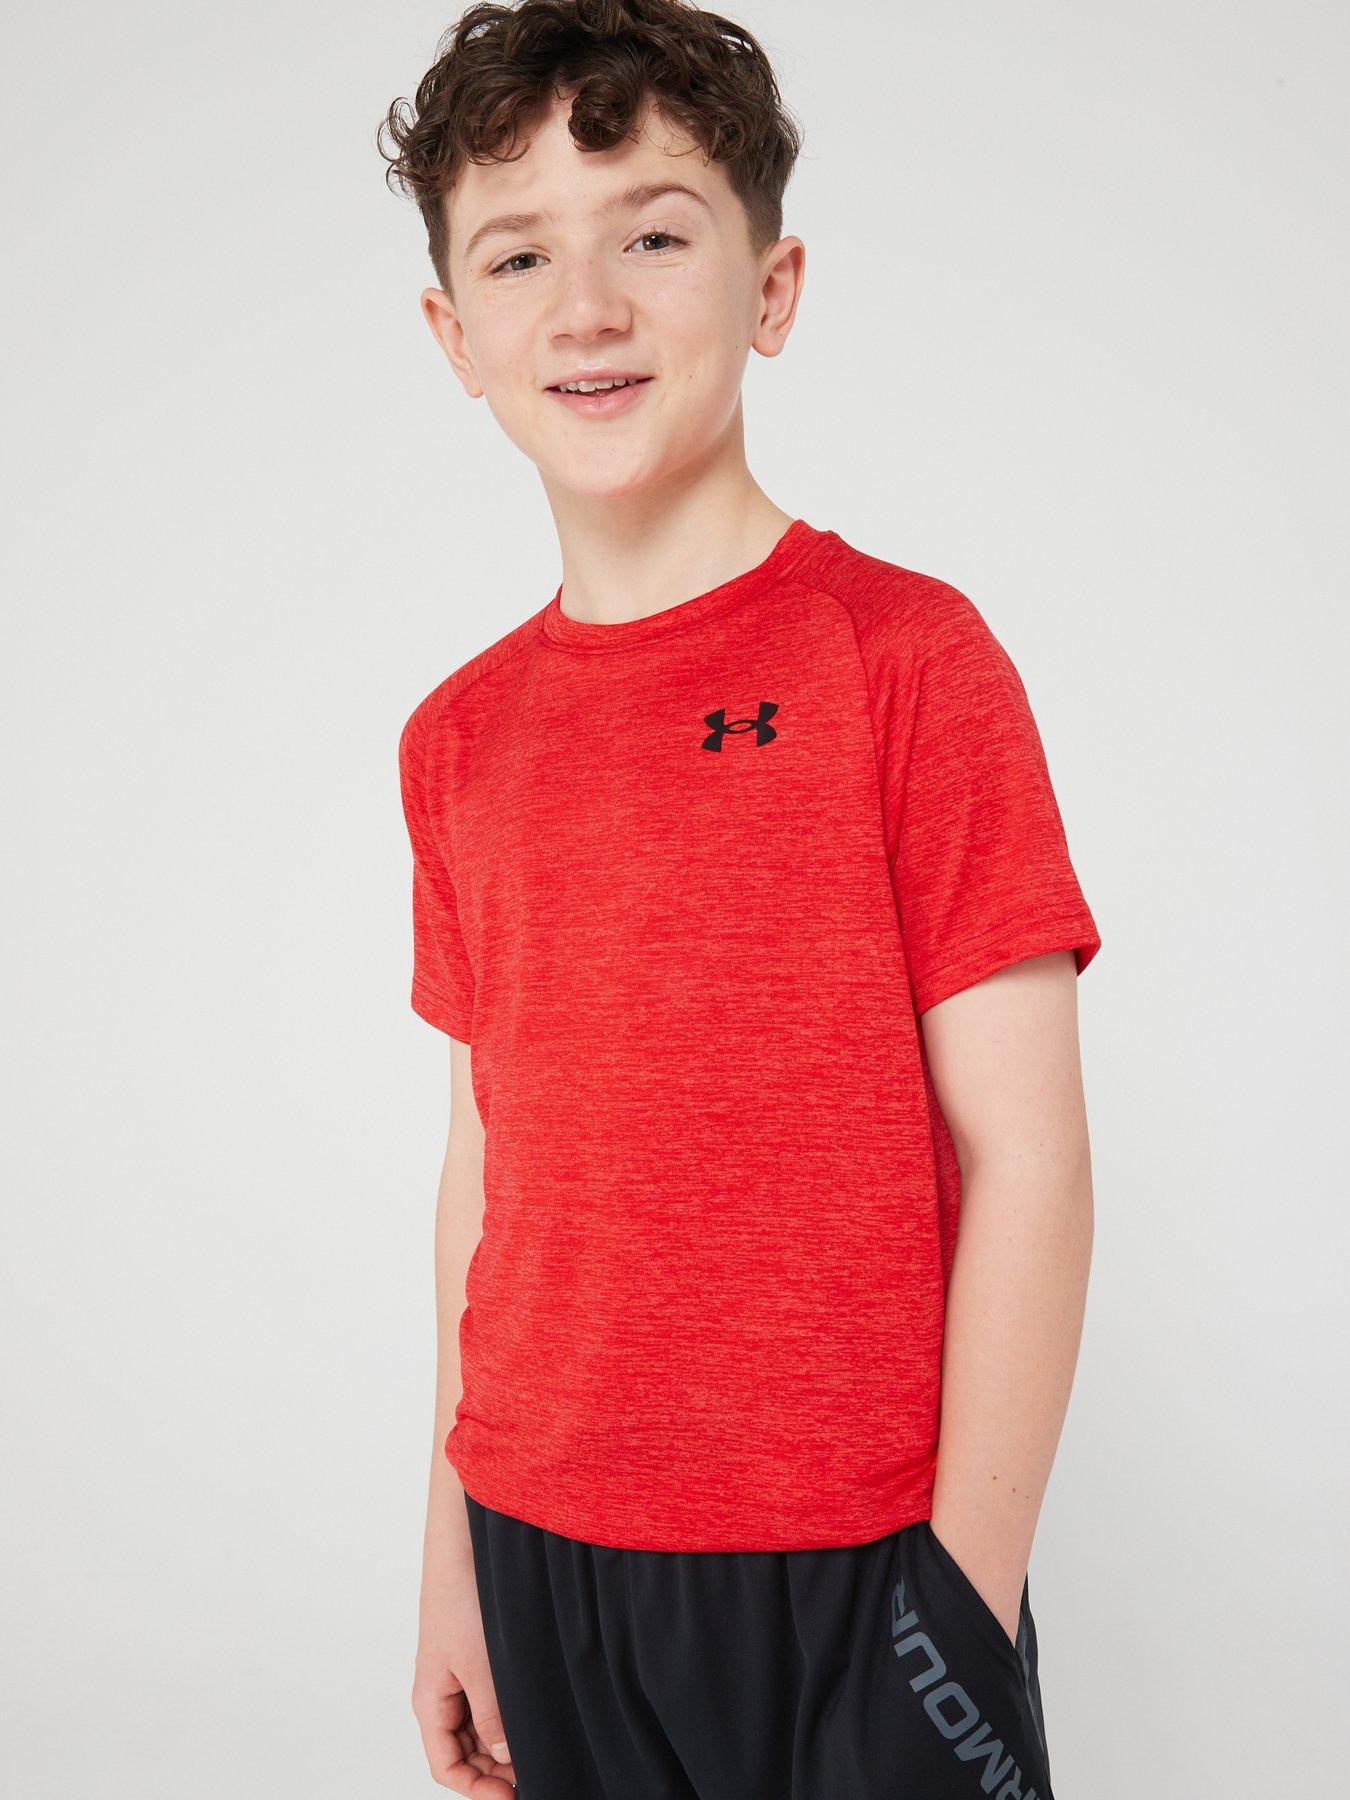 Under armour, Kids & baby sports clothing